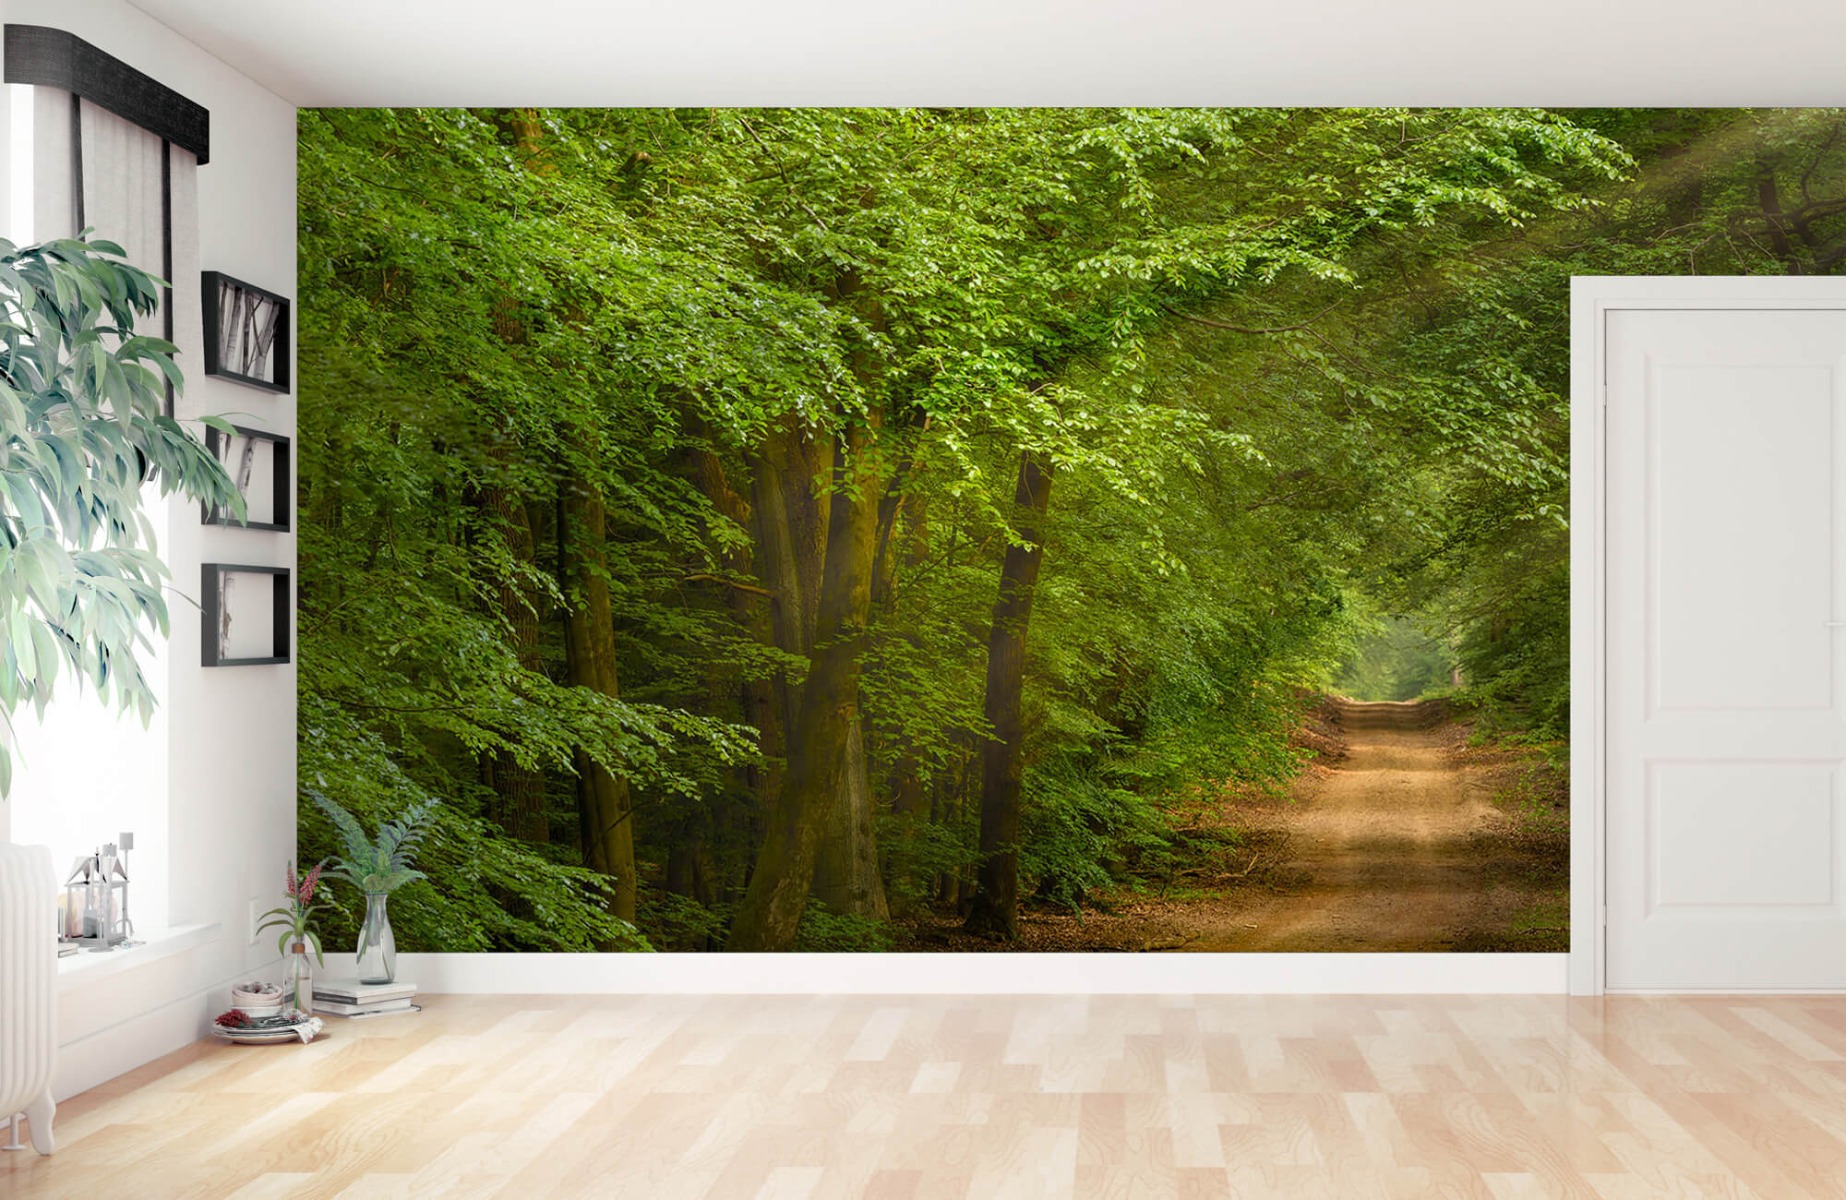 Forest wallpaper - Toad in forest with sunbeams  - Bedroom 11